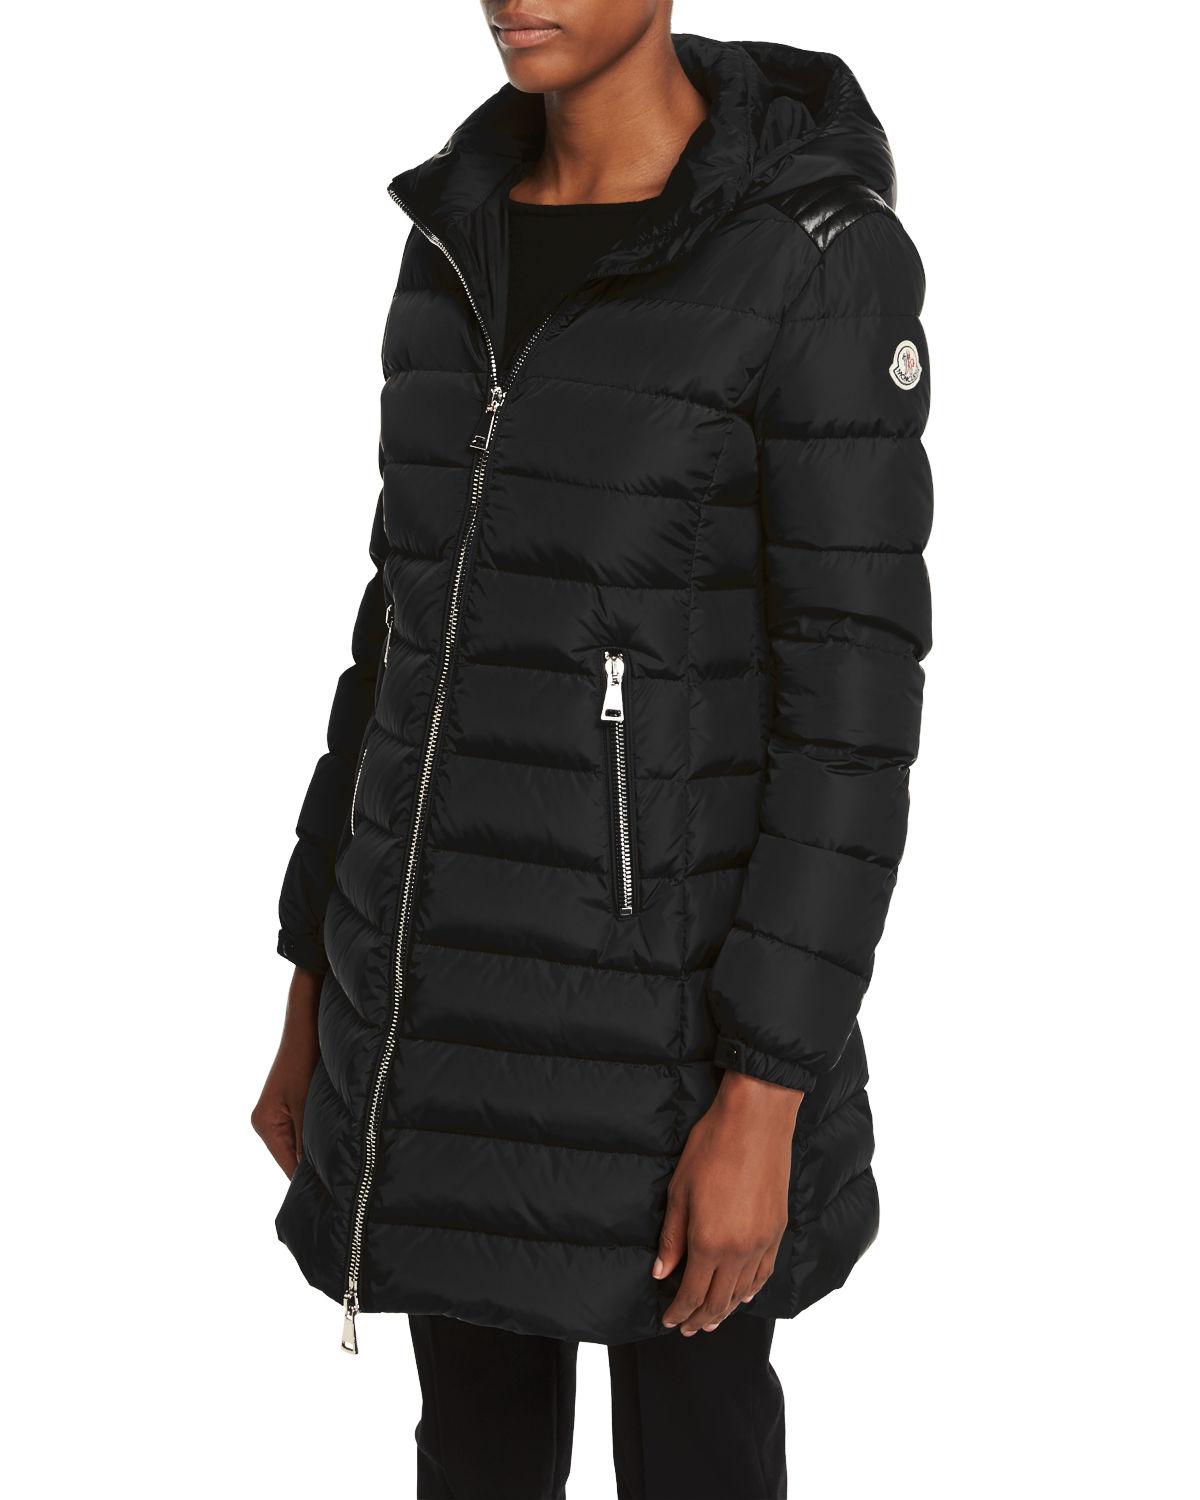 Lyst - Moncler Orophin Long Puffer Coat W/leather Trim in Black